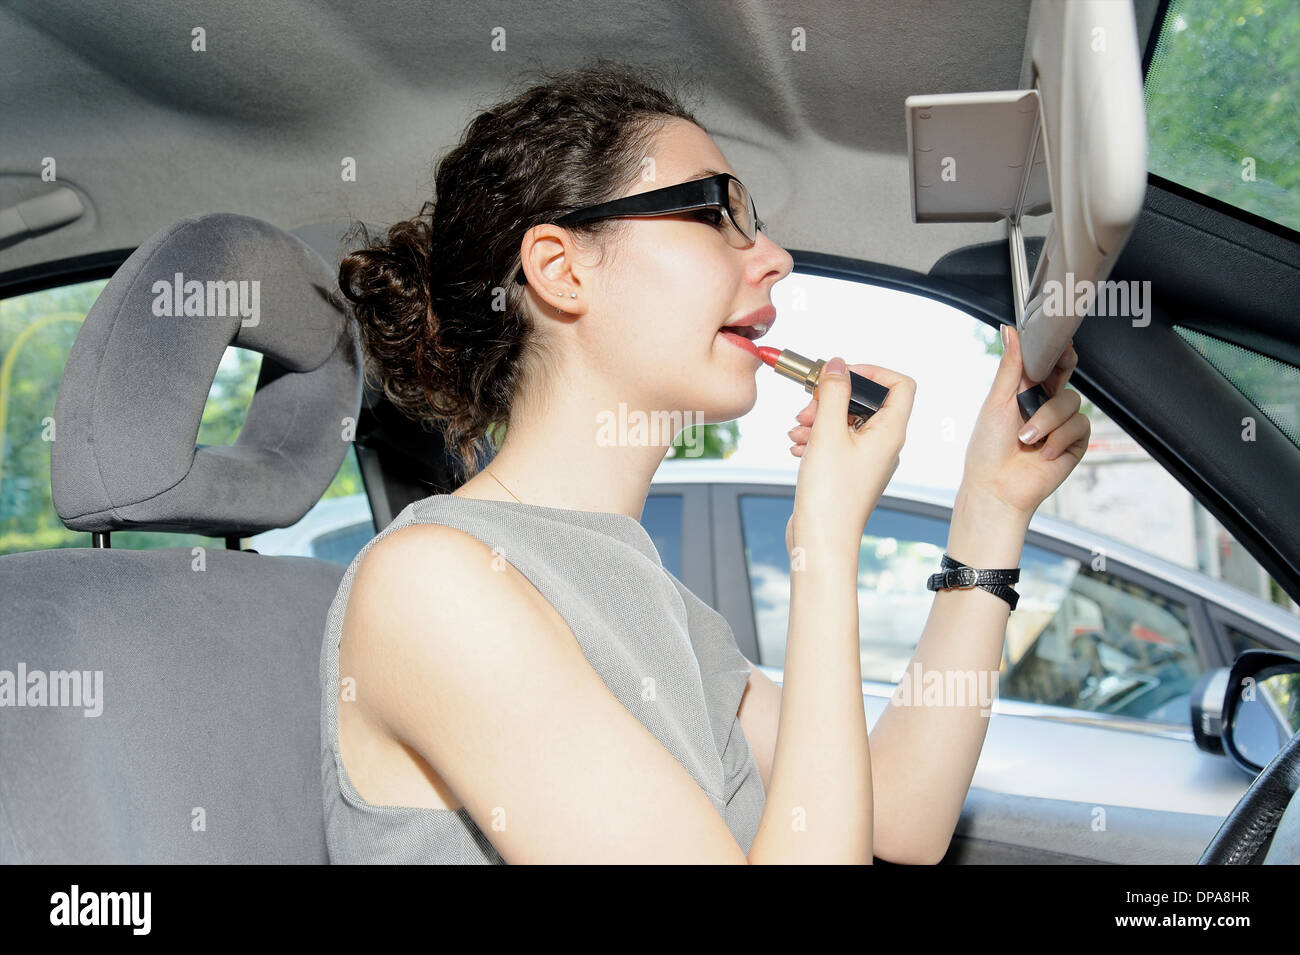 Young woman applying lipstick in car Banque D'Images